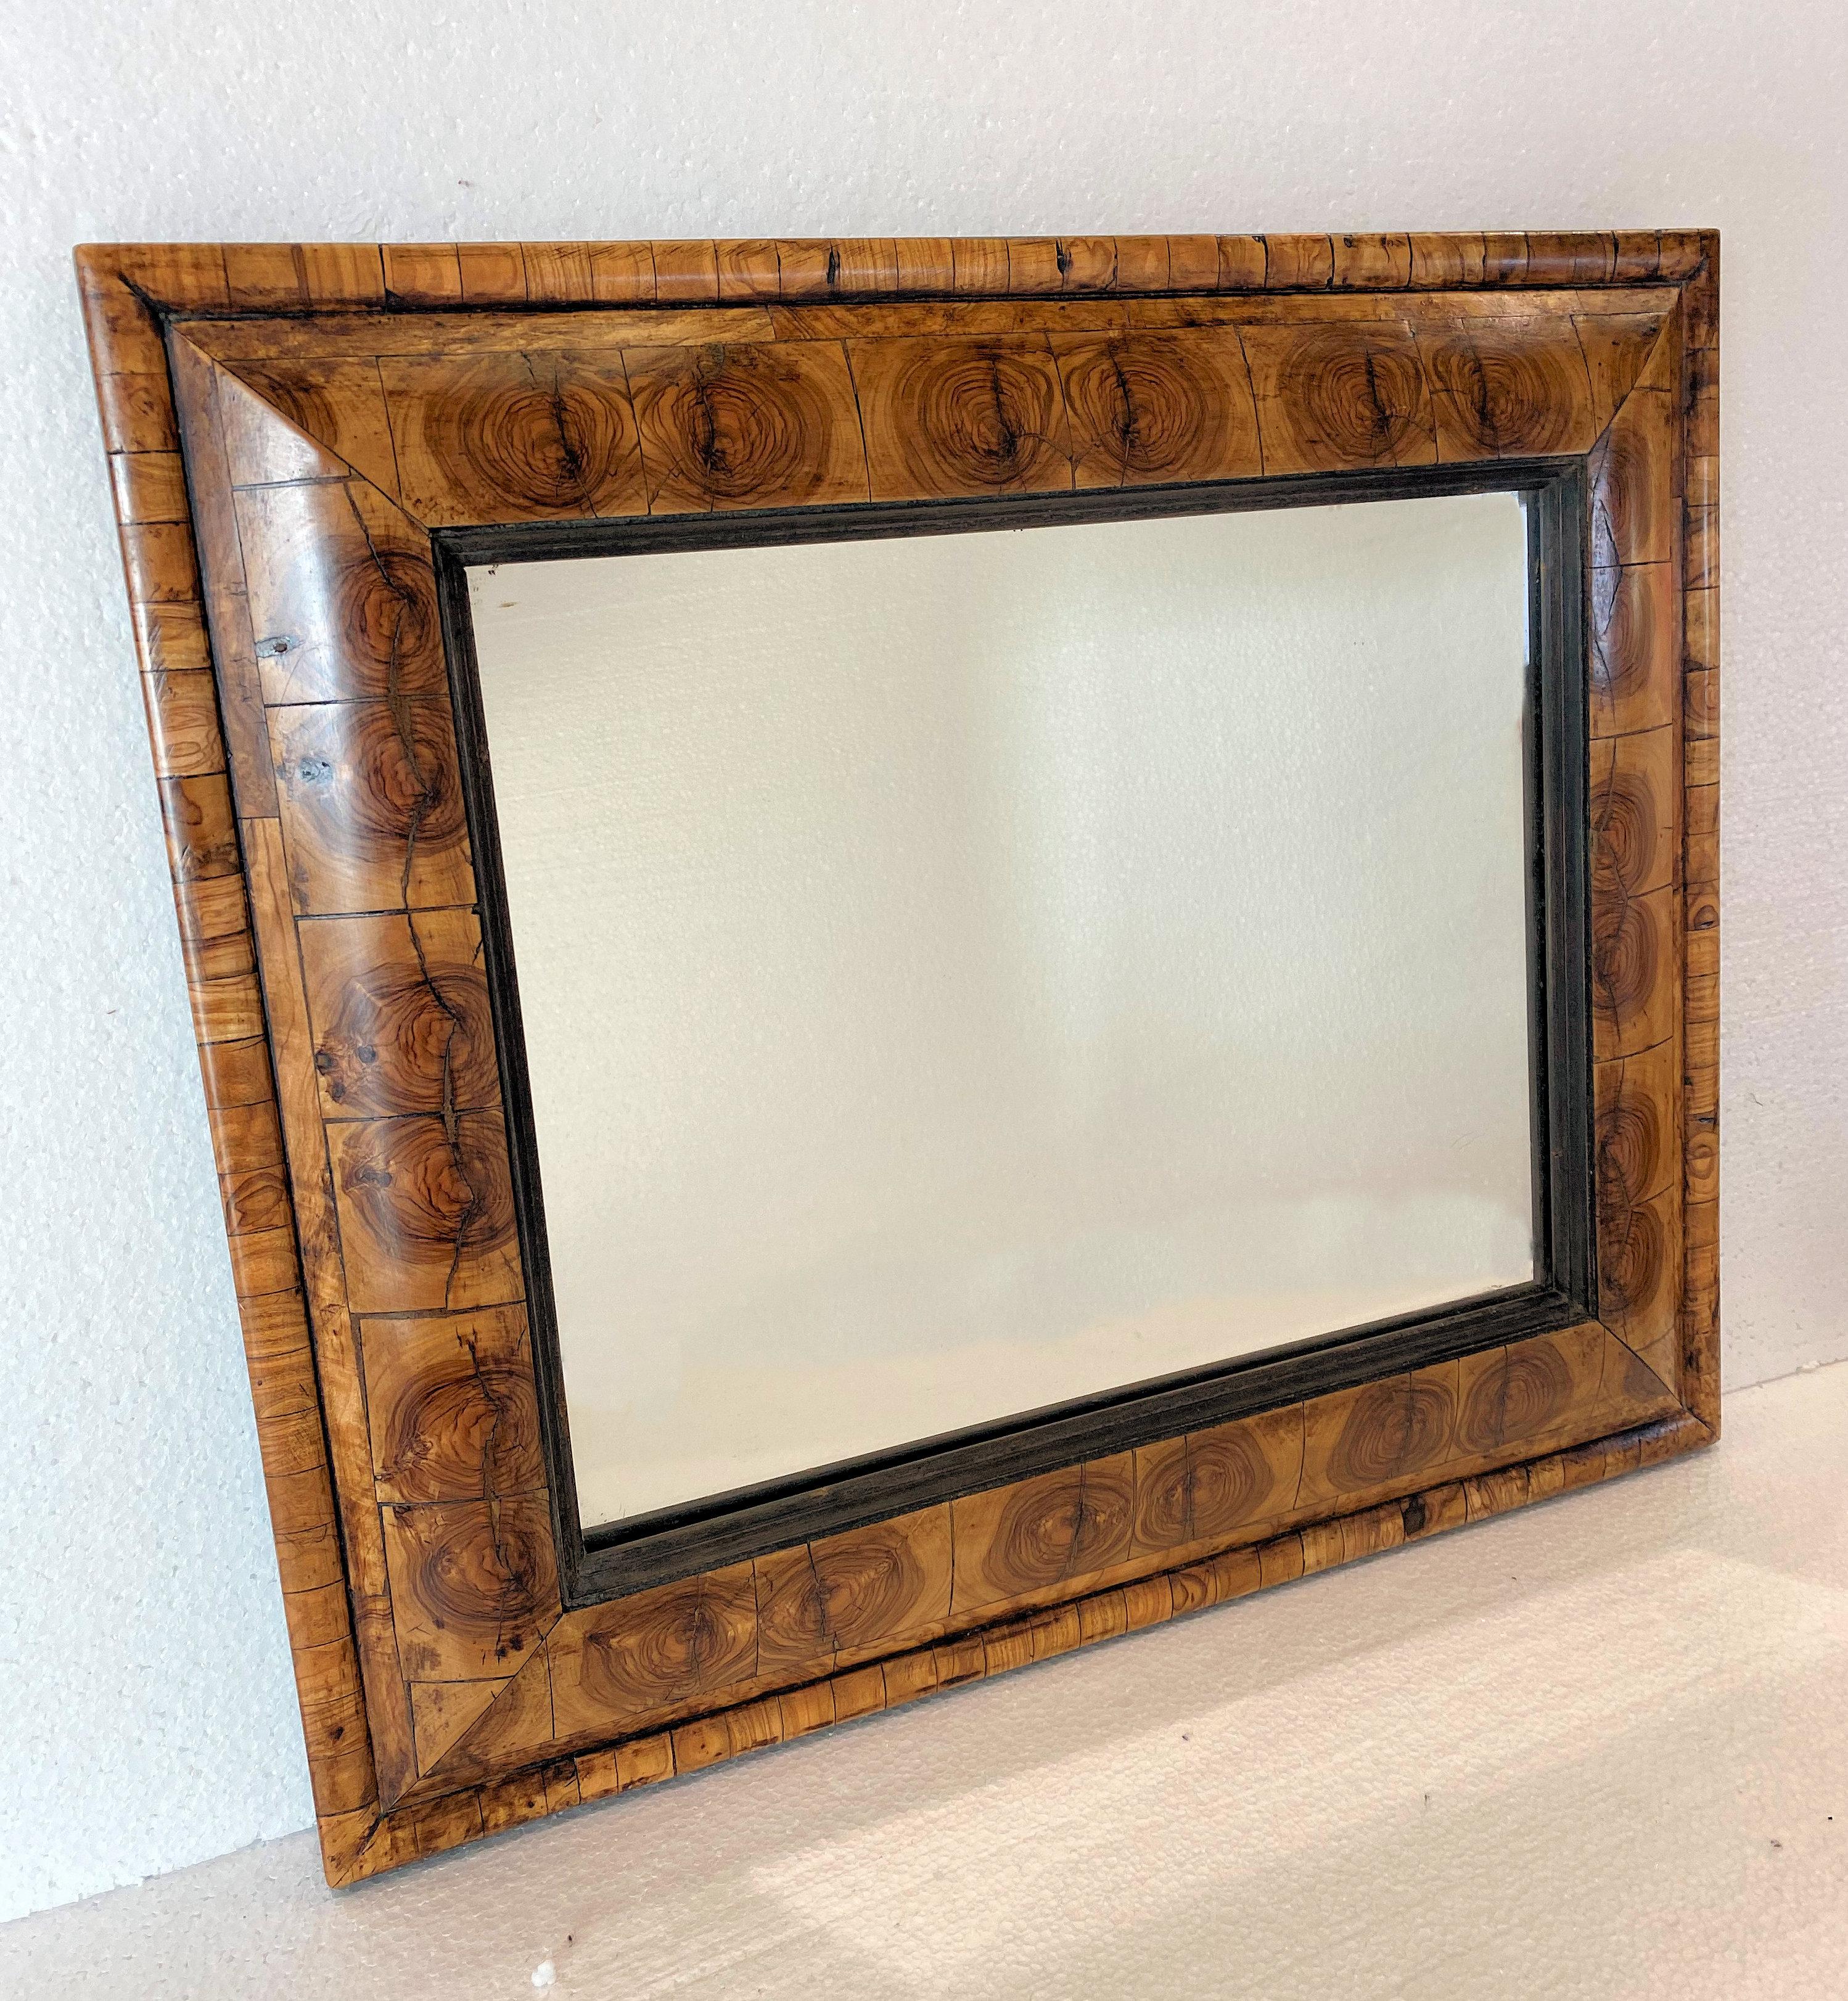 This lovely 20th century veneered cushion mirror is styled in the 17th Century design. It is rectangular in shape and features a lovely veneer design within the border. It measures 21 inches by 17.3/4 inches with a depth of 2 inches. This mirror